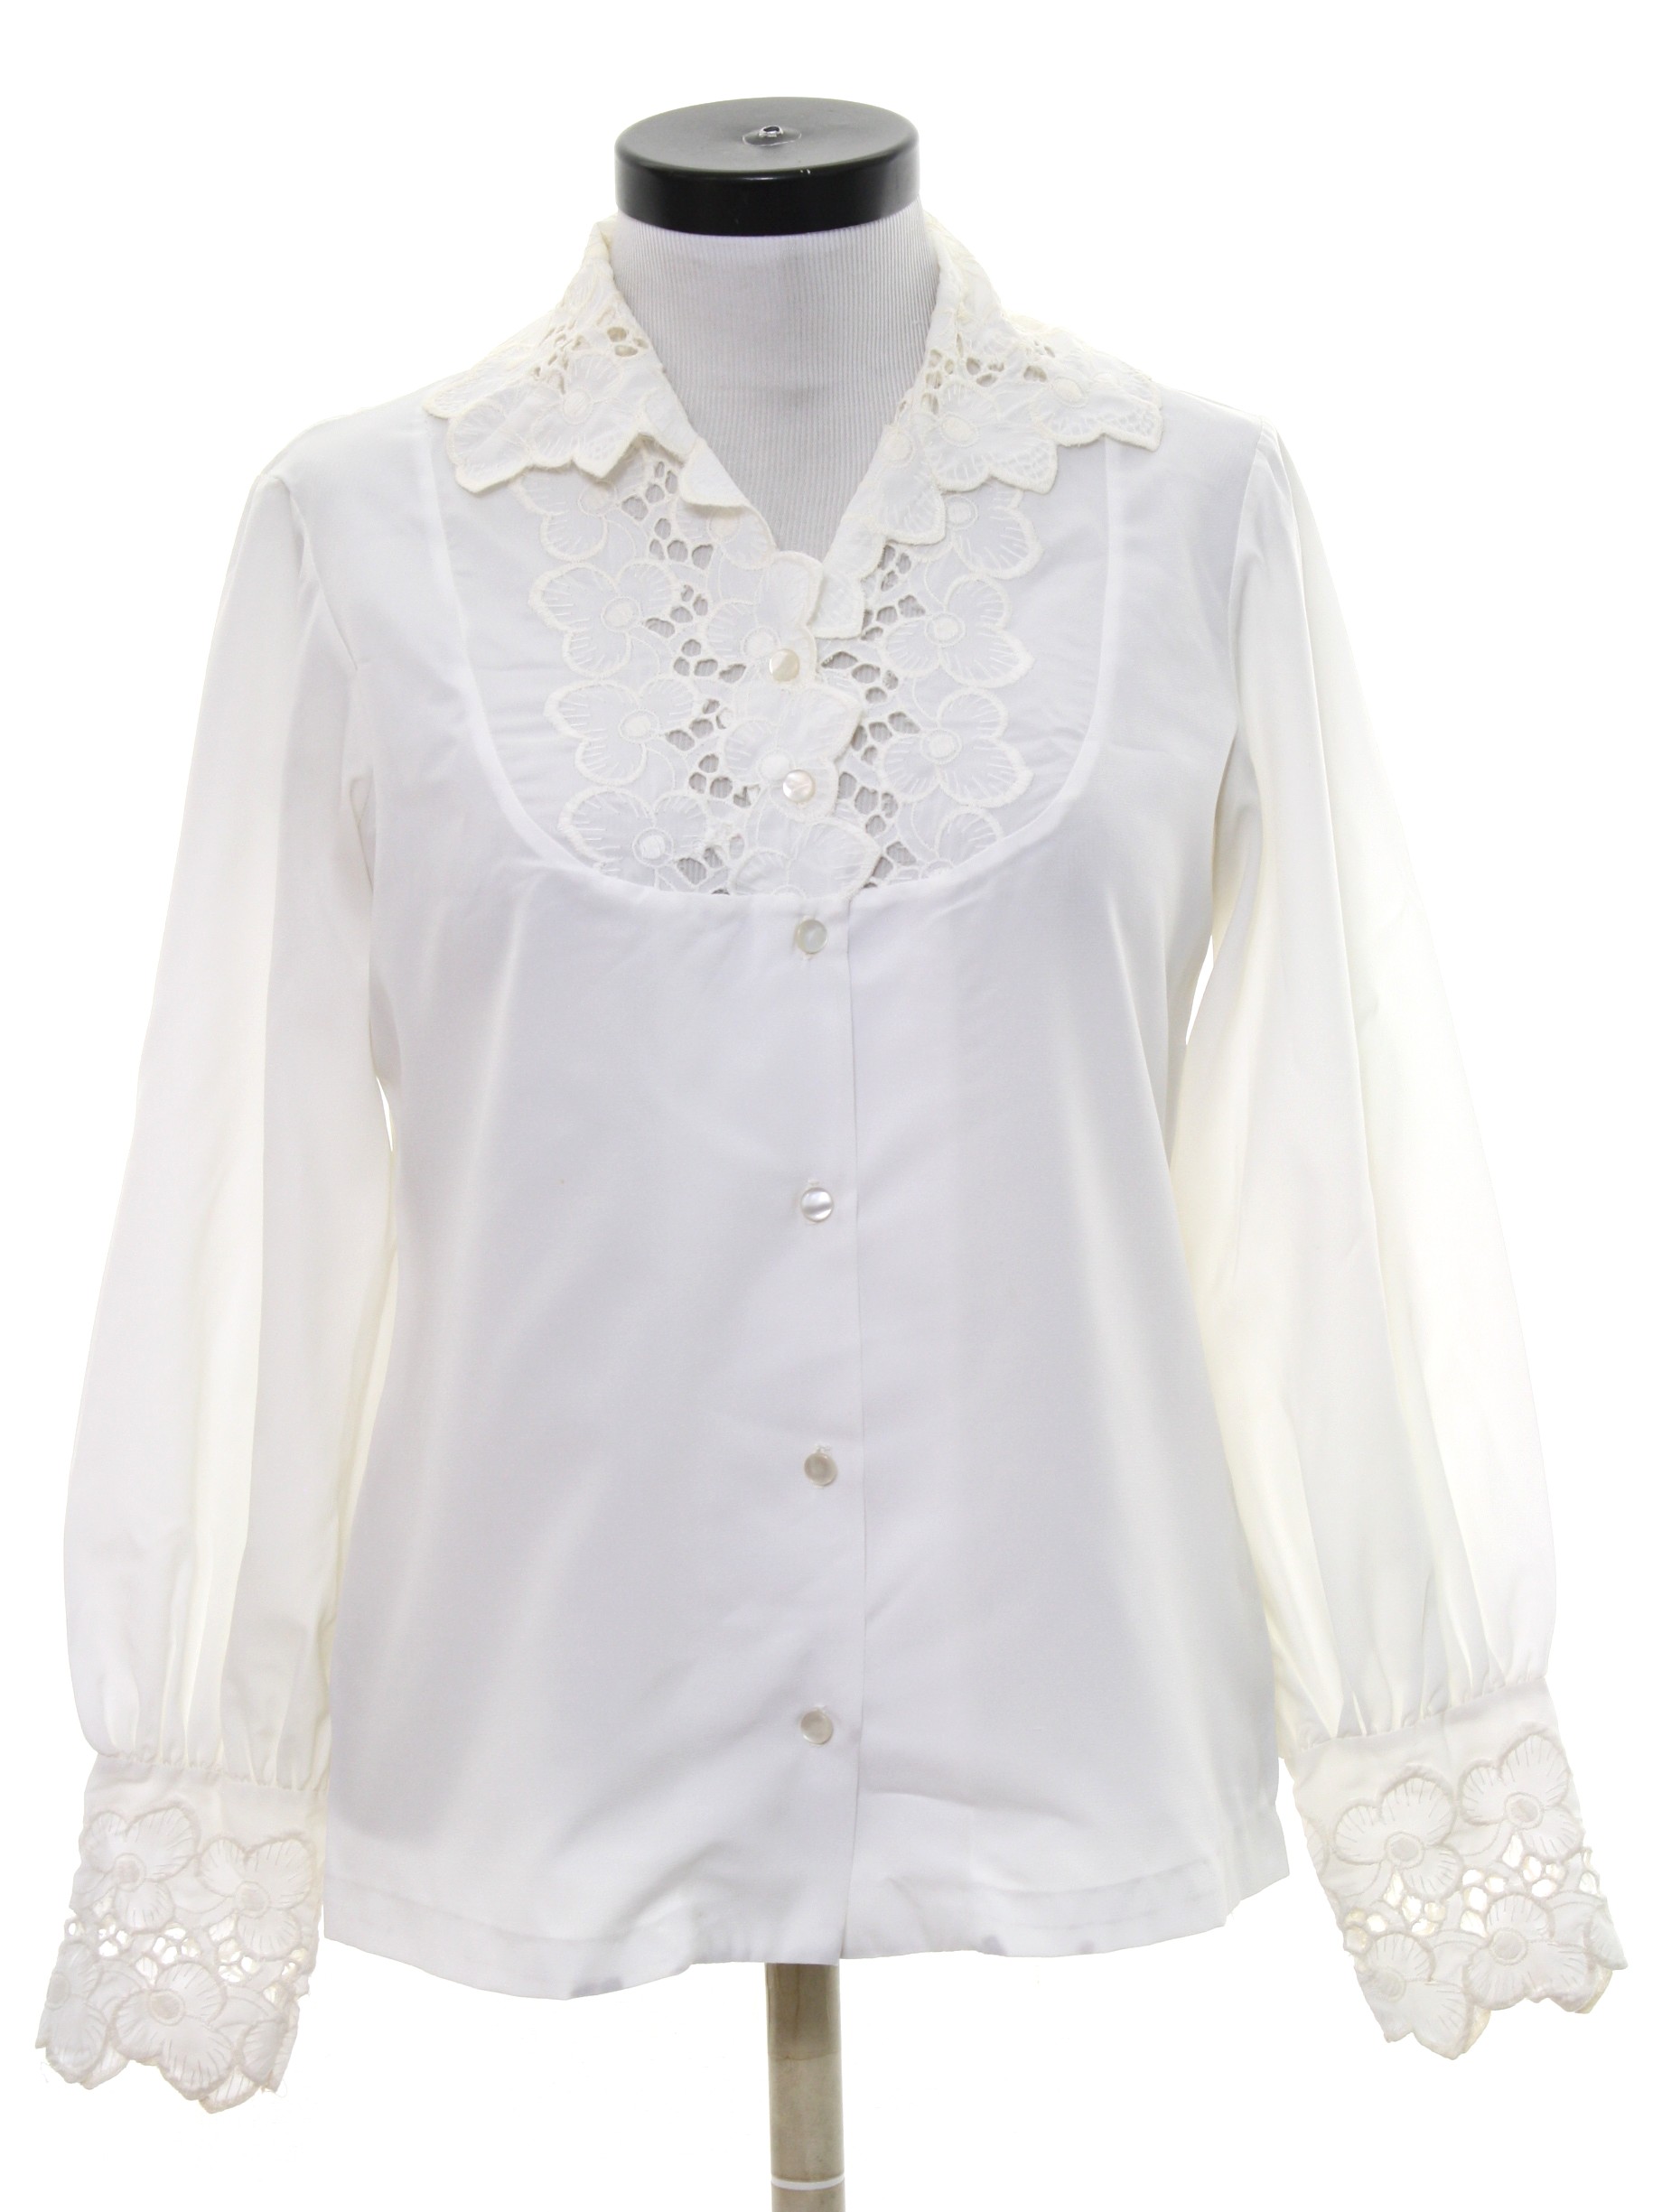 70's Vintage Shirt: Late 70s or Early 80s -Lee Mar- Womens white silky ...